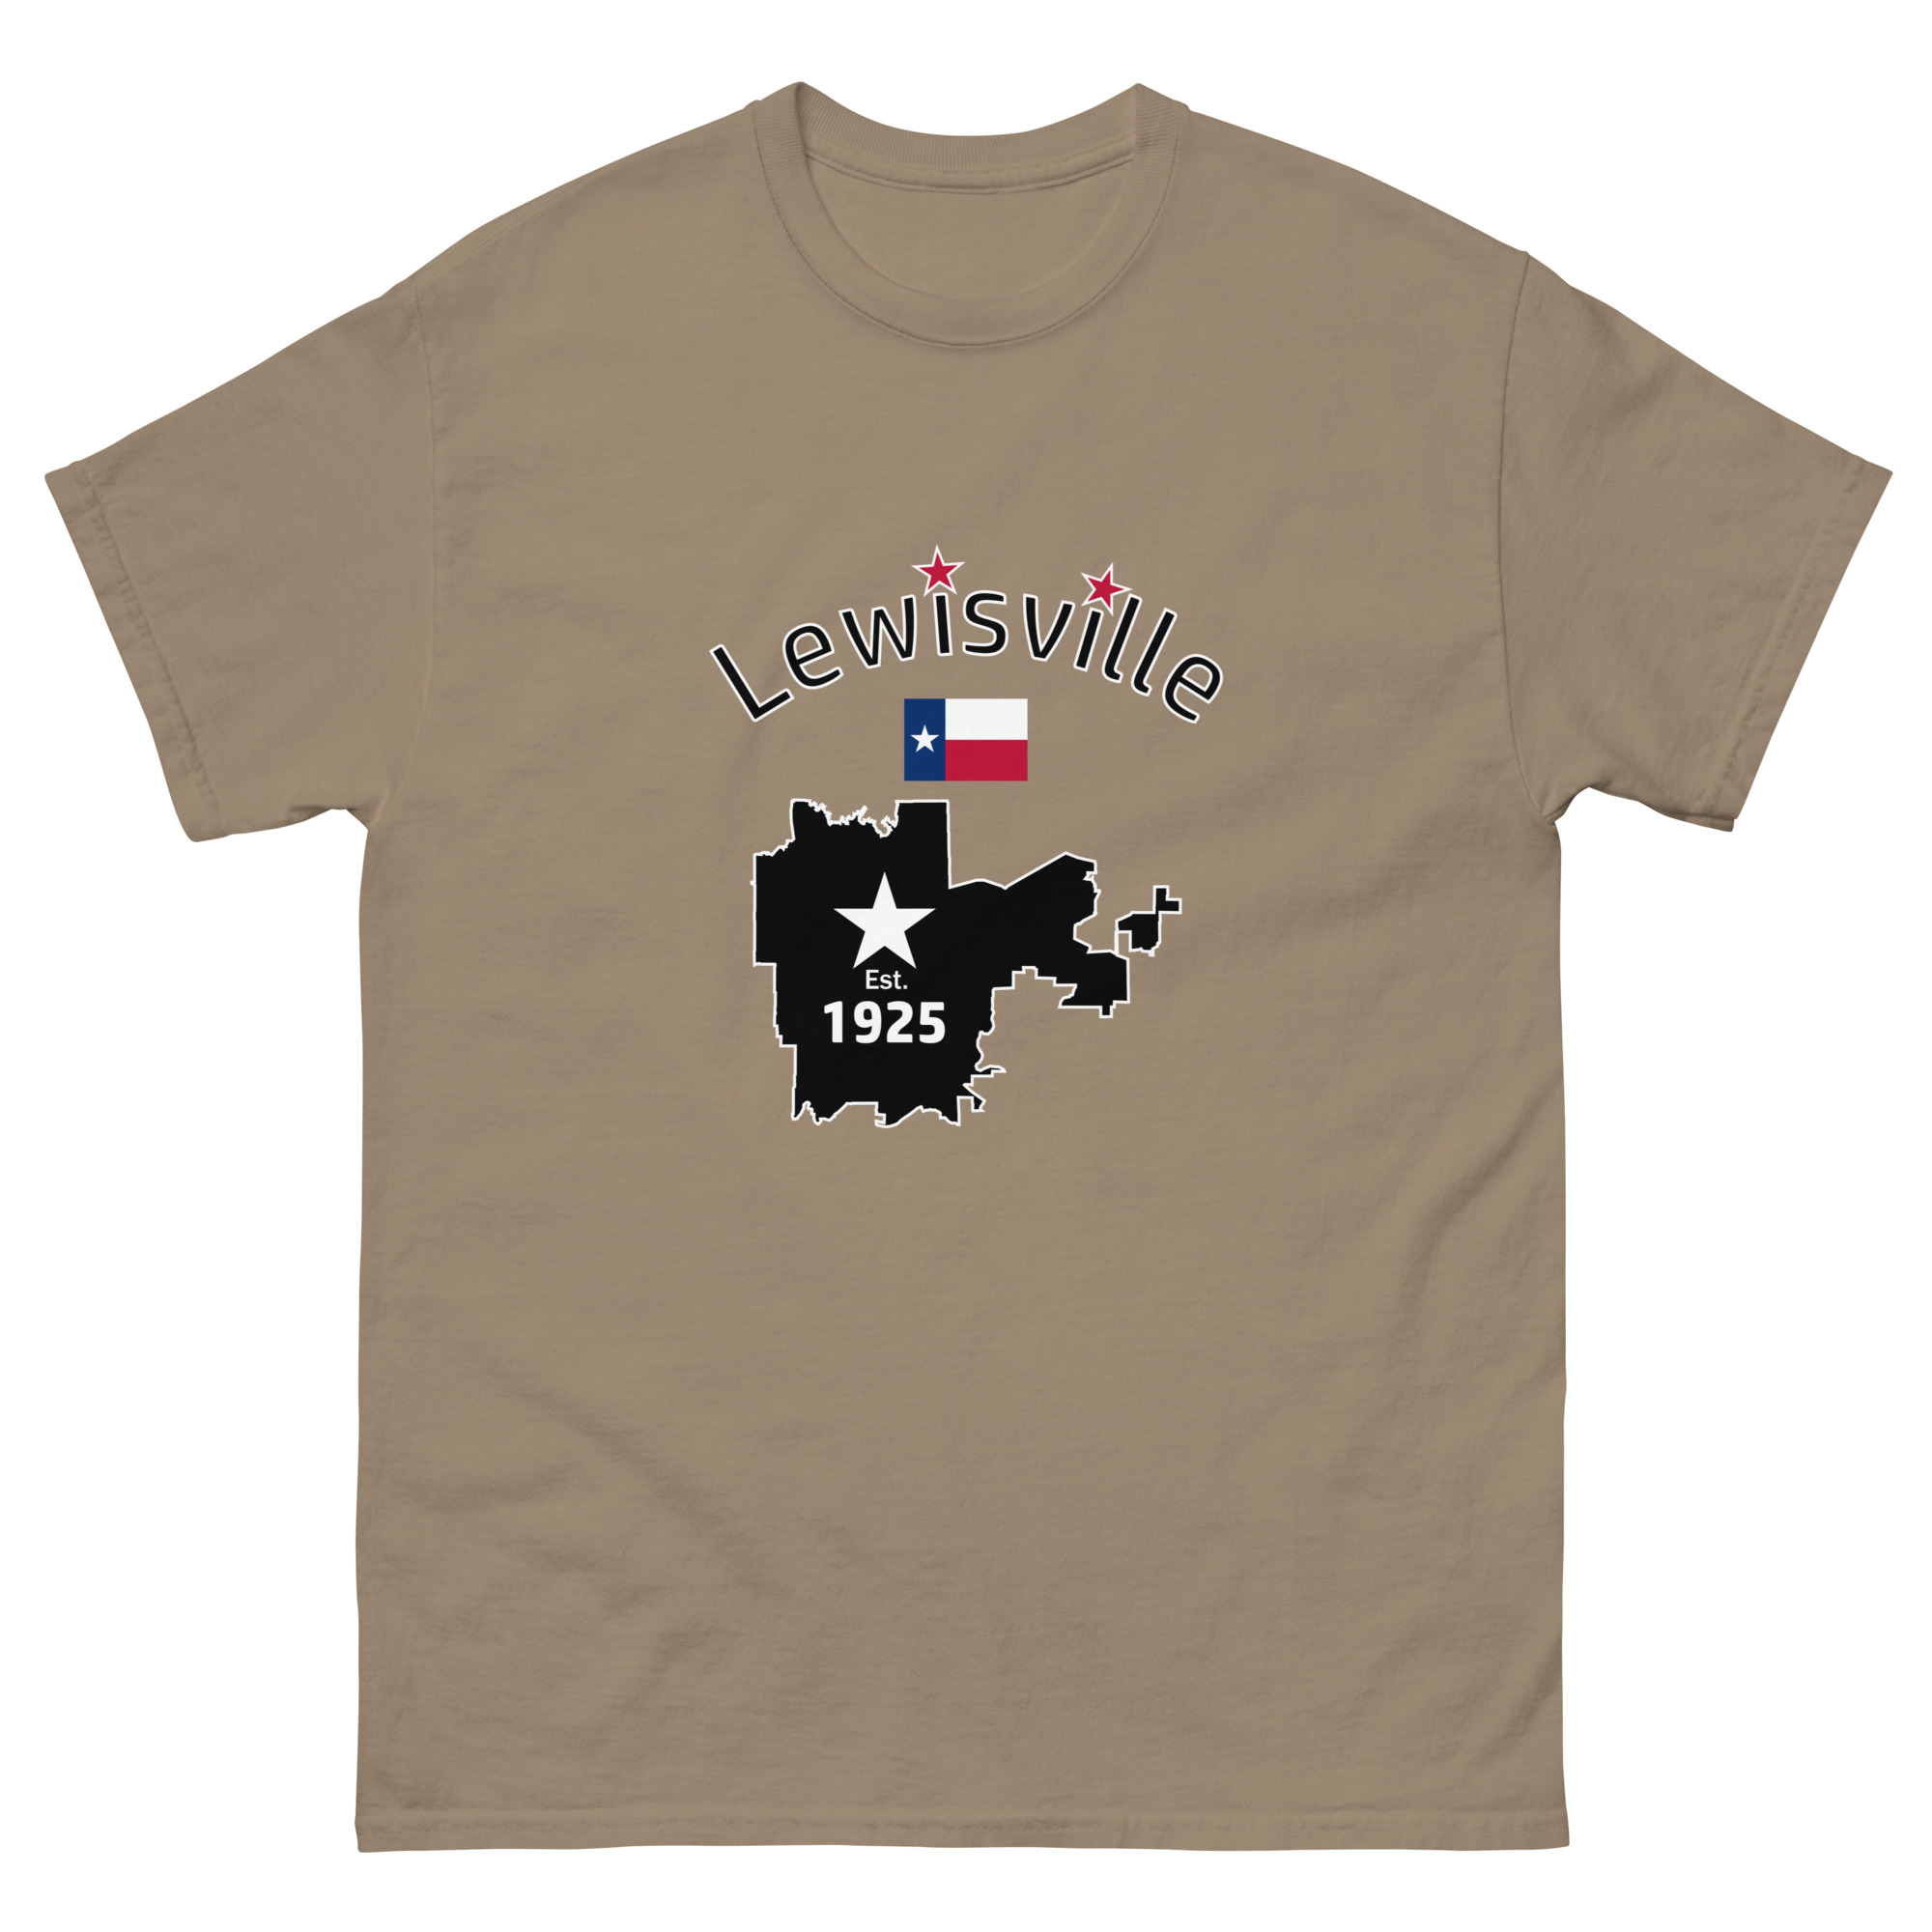 Lewisville 1925 Cotton Tee with Texas Map and Flag